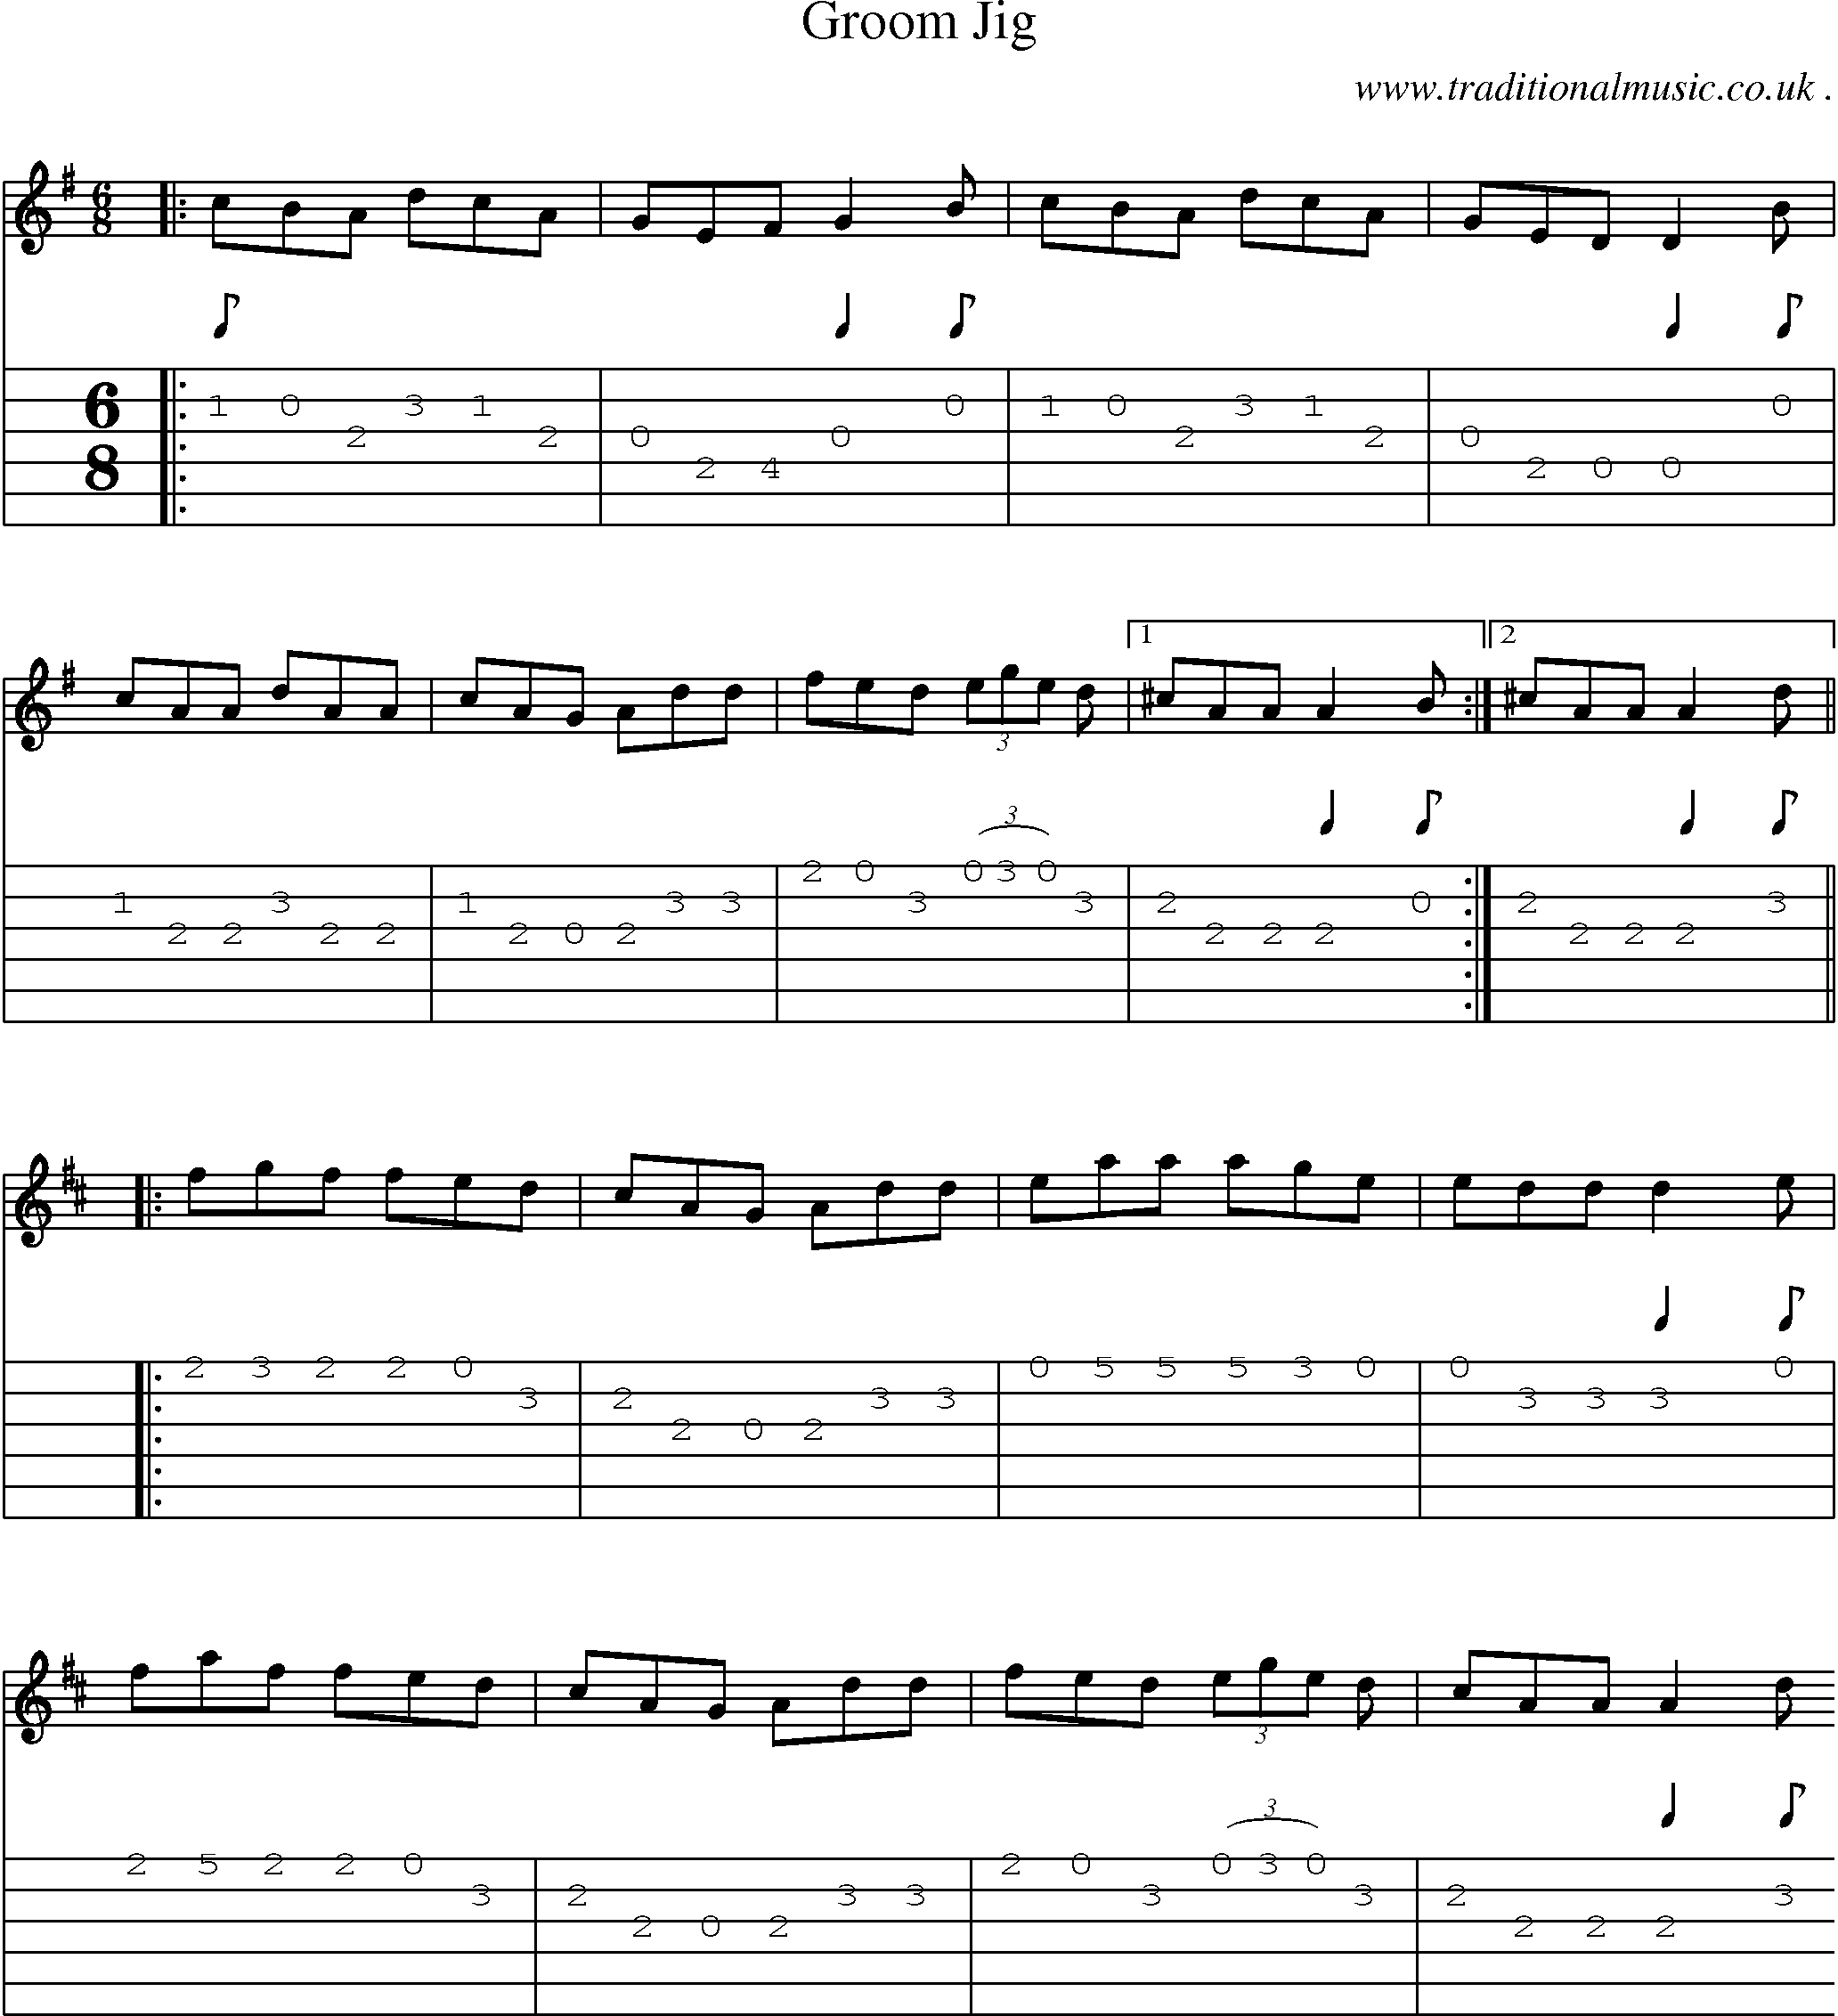 Sheet-Music and Guitar Tabs for Groom Jig